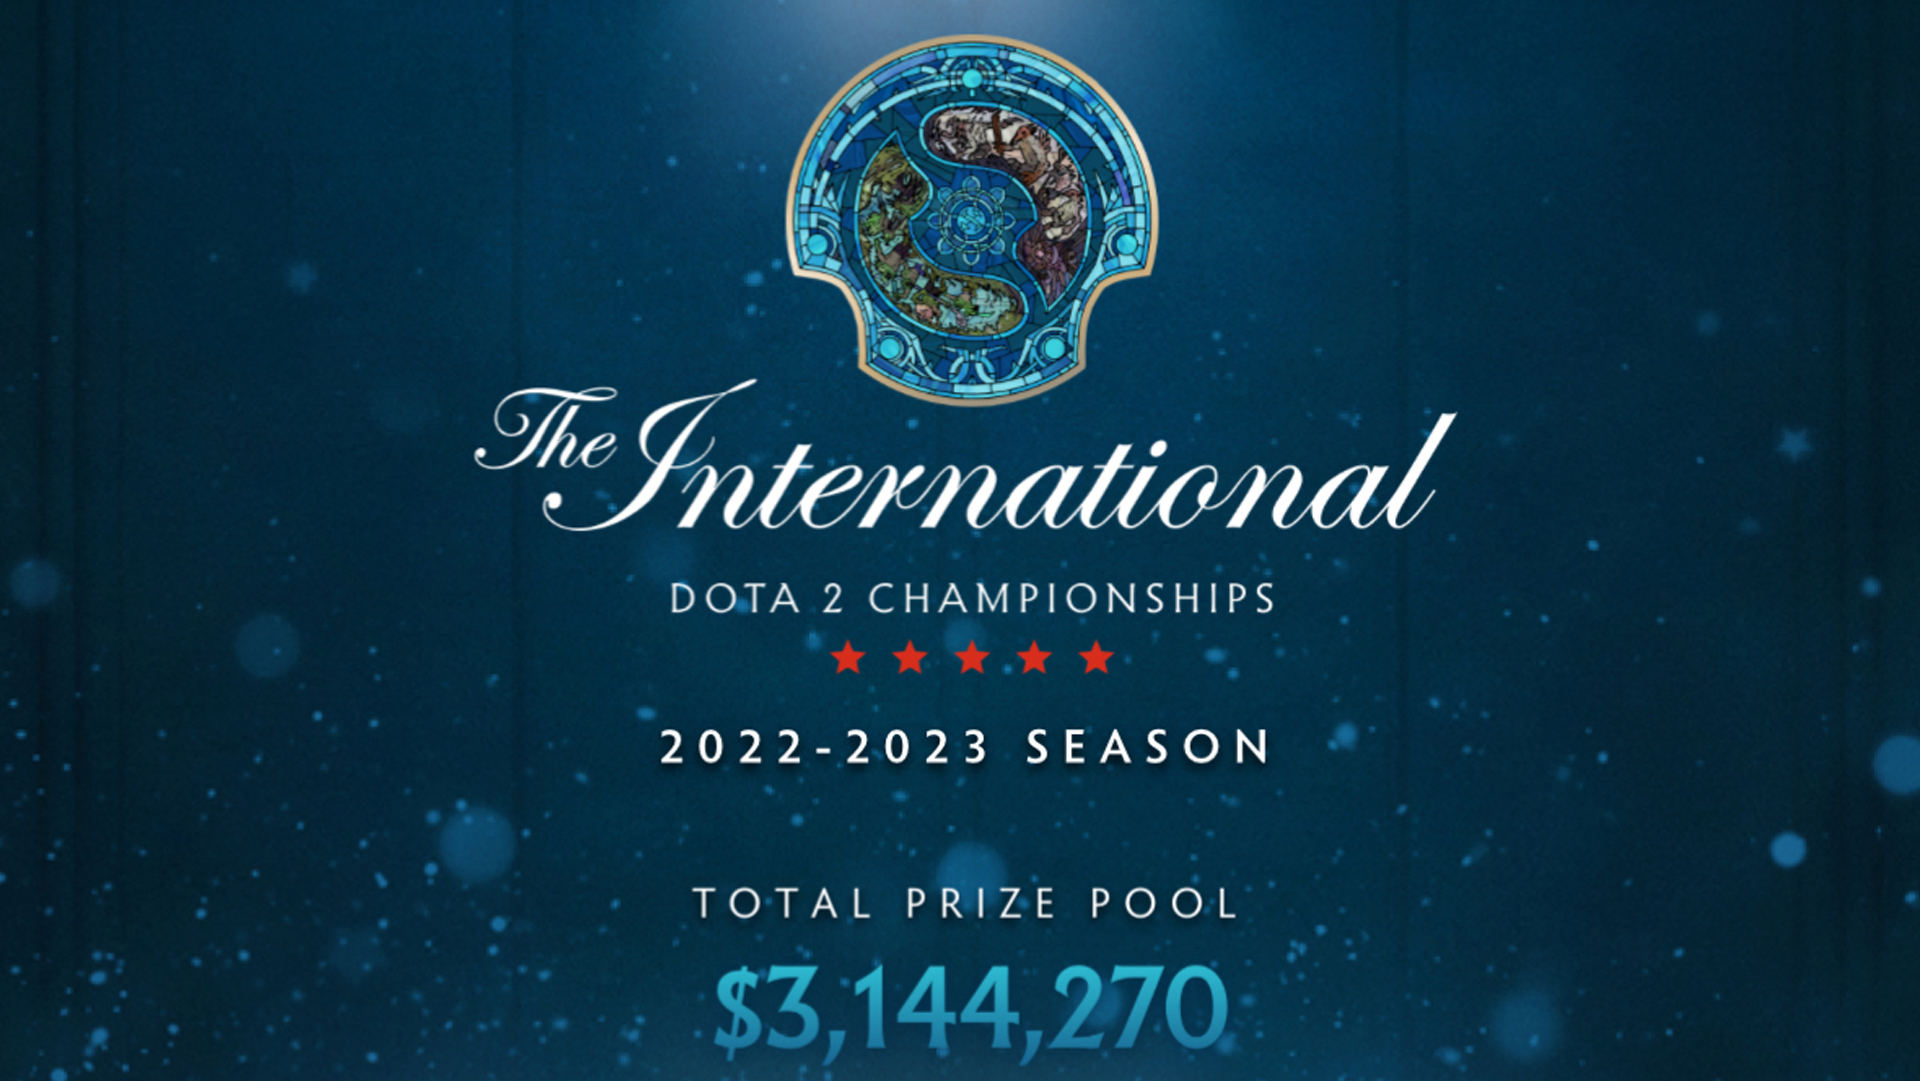 The International of Dota 2 is one of the most famous esprot tournaments in the world